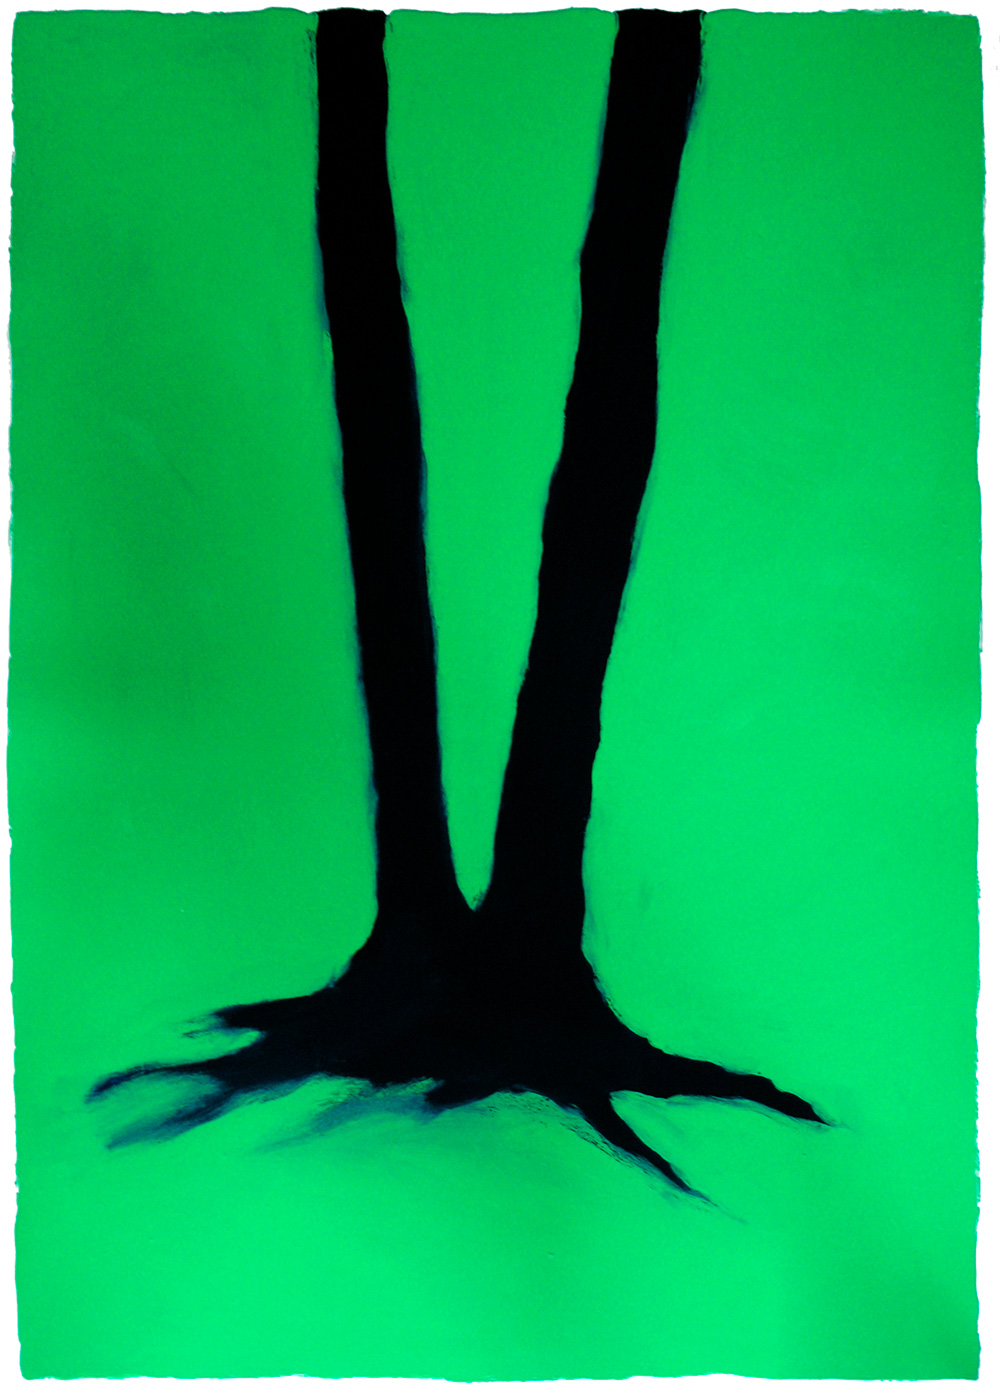 Peace Tree, a painting by Guido Vrolix